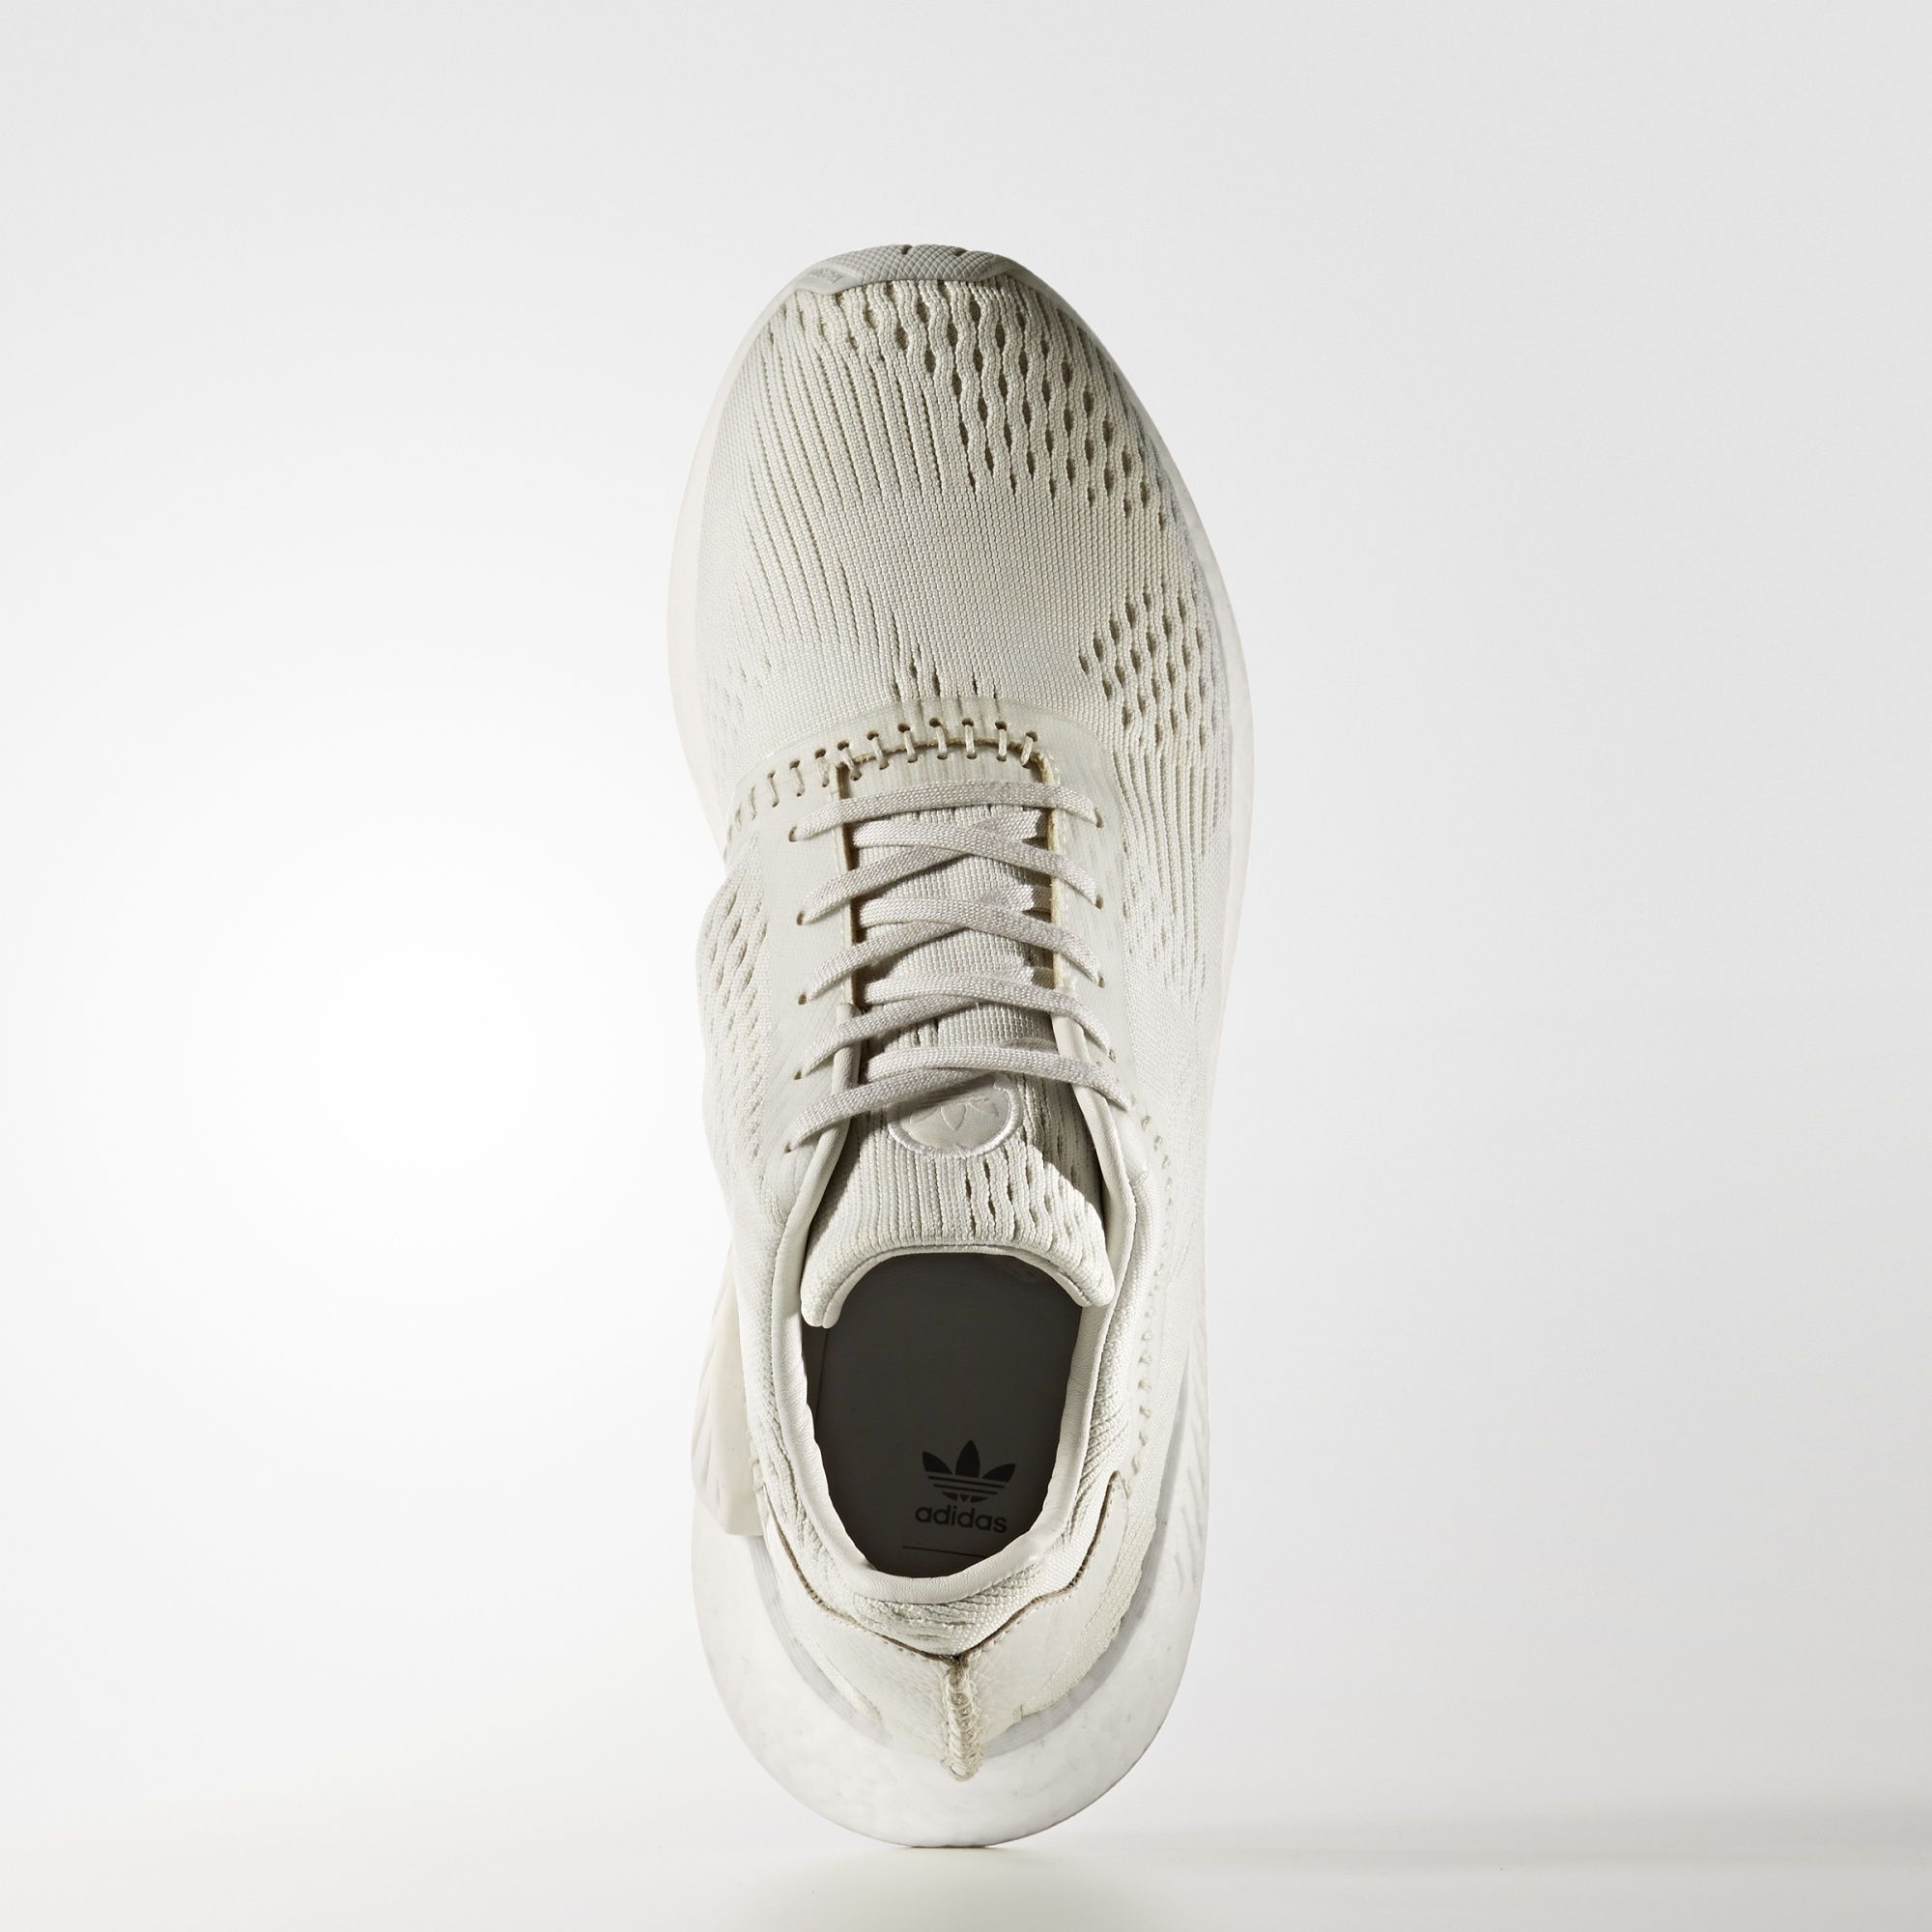 Adidas Originals by Wings + Horns 
NMD_R2 Primeknit Boost
Off-White / White